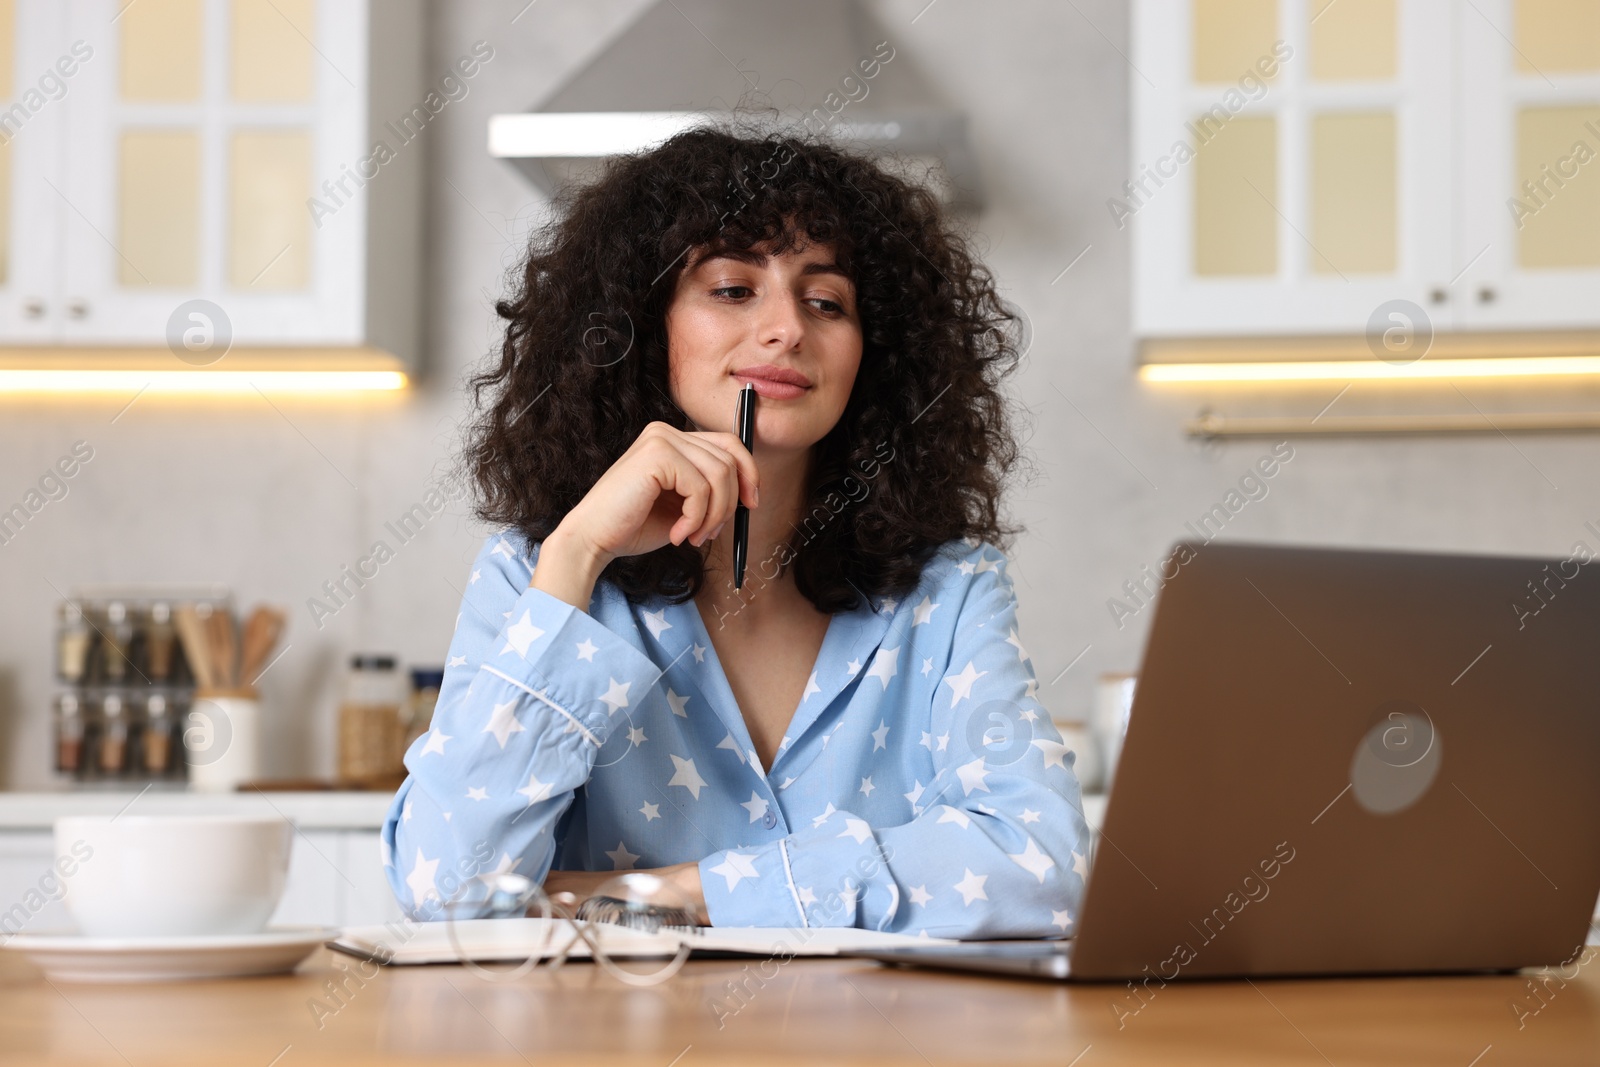 Photo of Beautiful young woman in stylish pyjama with pen using laptop at wooden table in kitchen